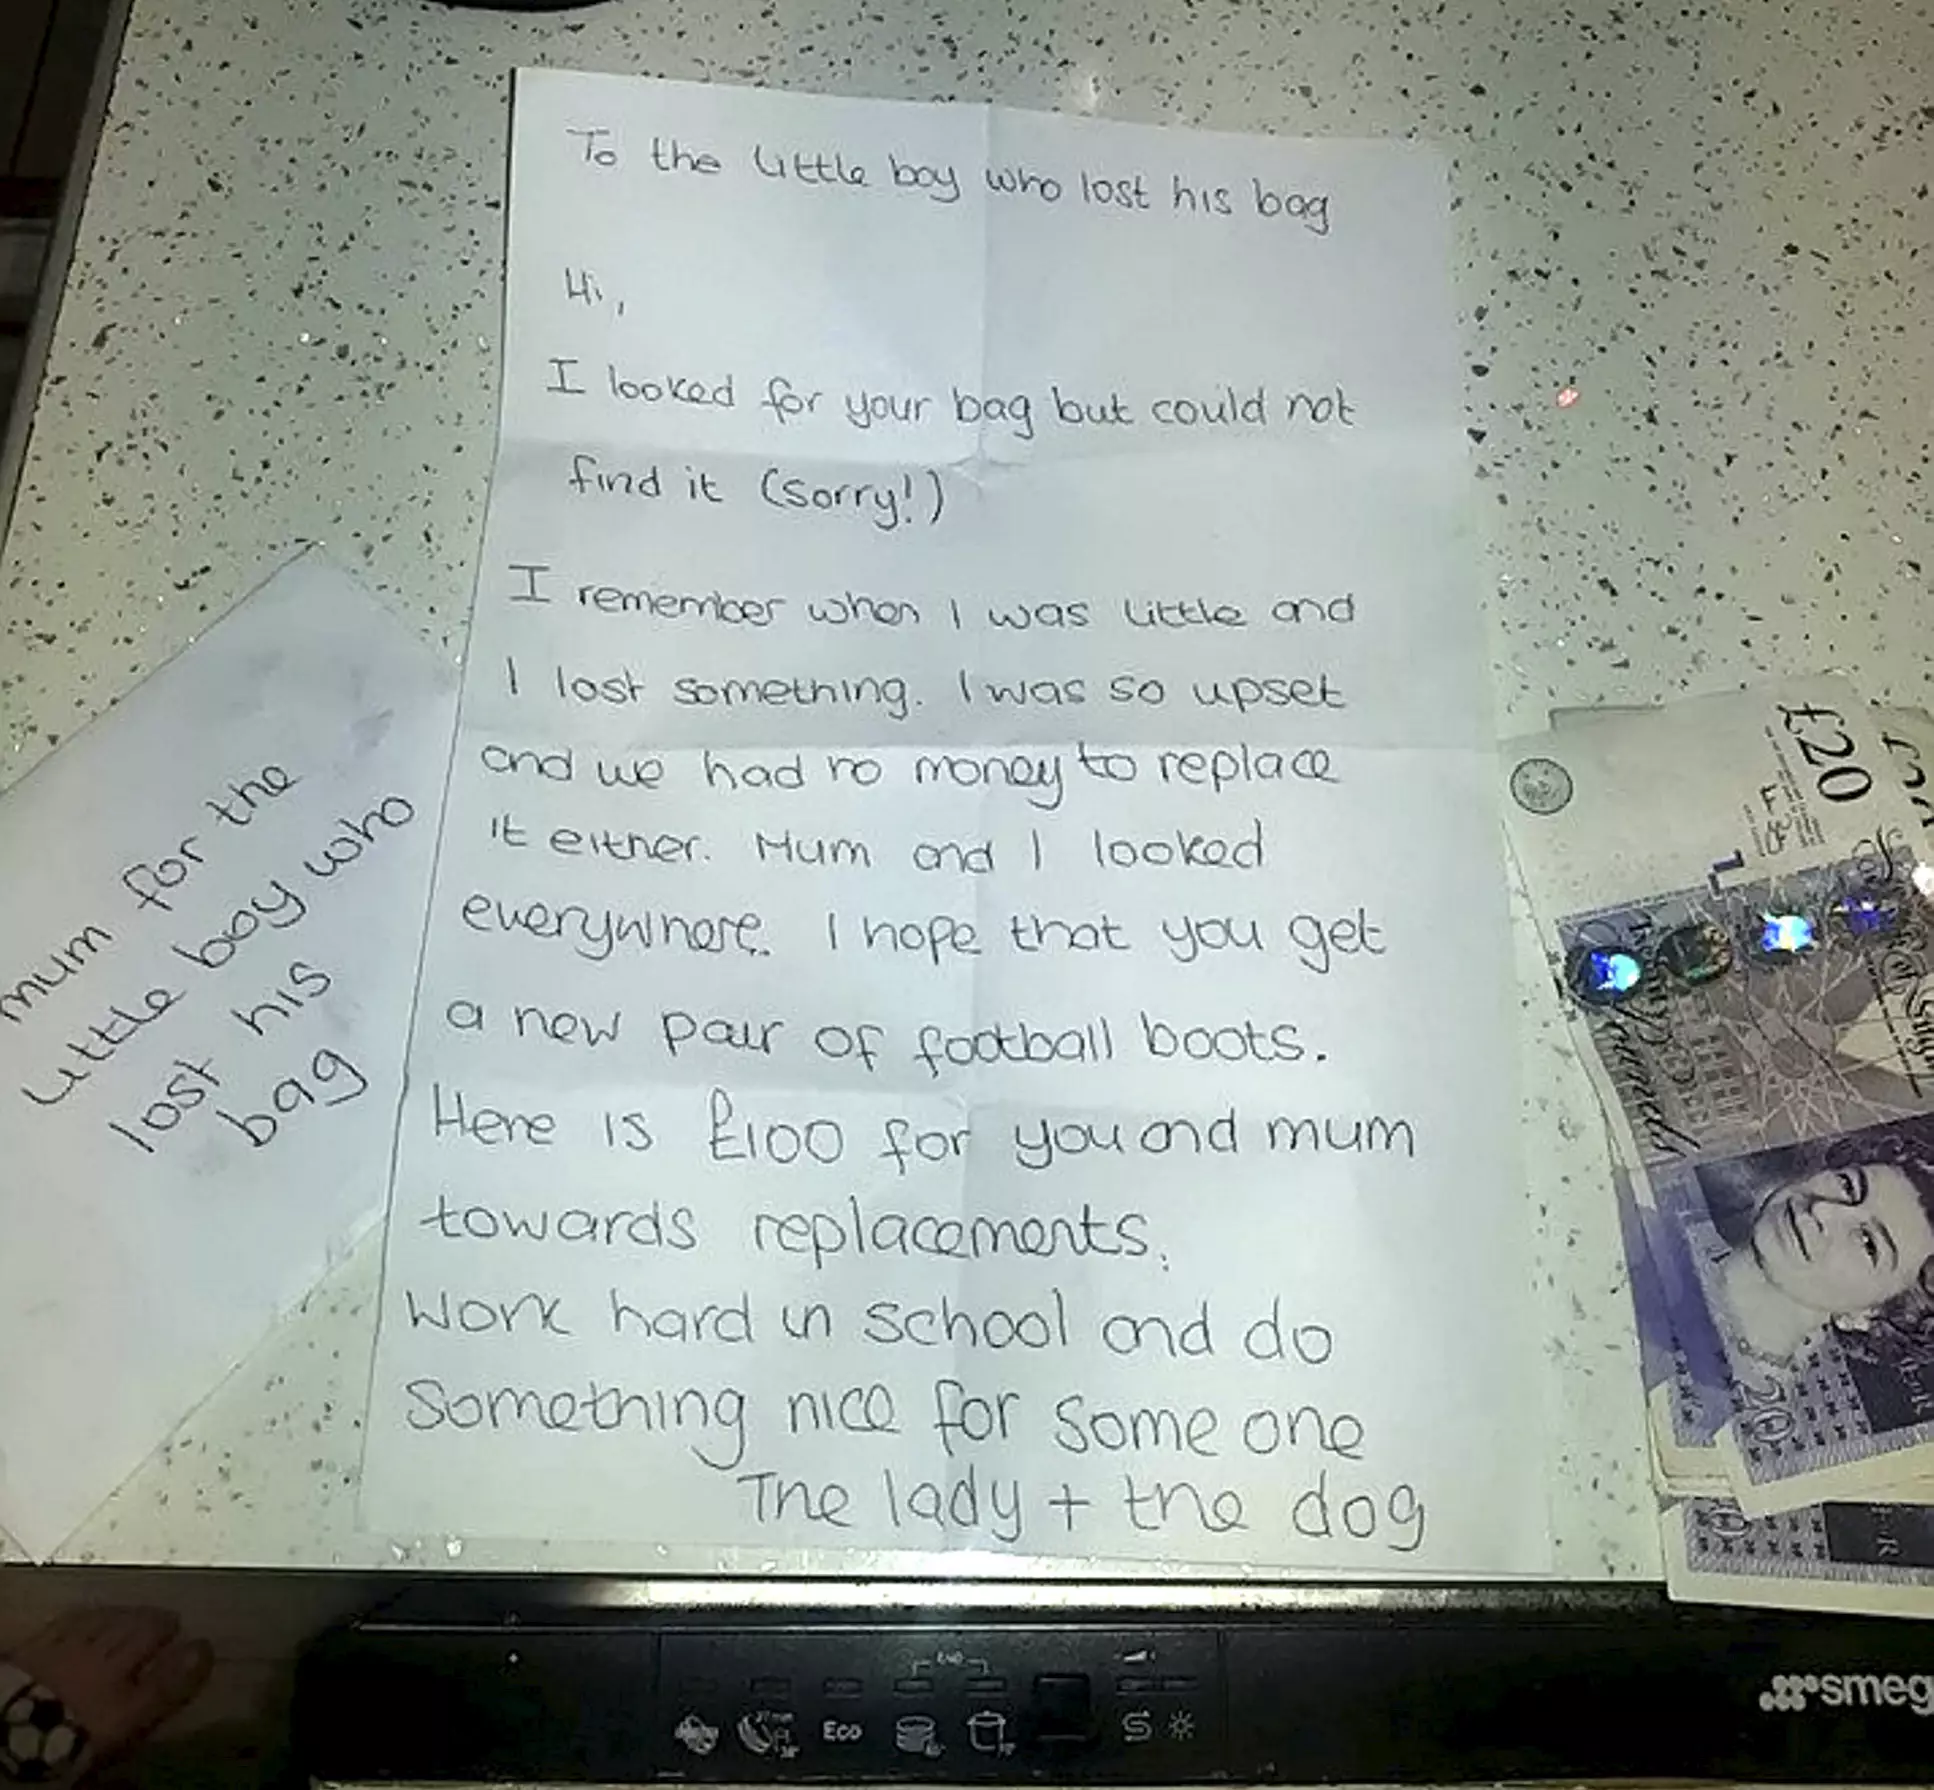 The Good Samaritan had tried to help Ashton find his bag and later went to search for herself before posting the £100 through their letterbox along with a note (